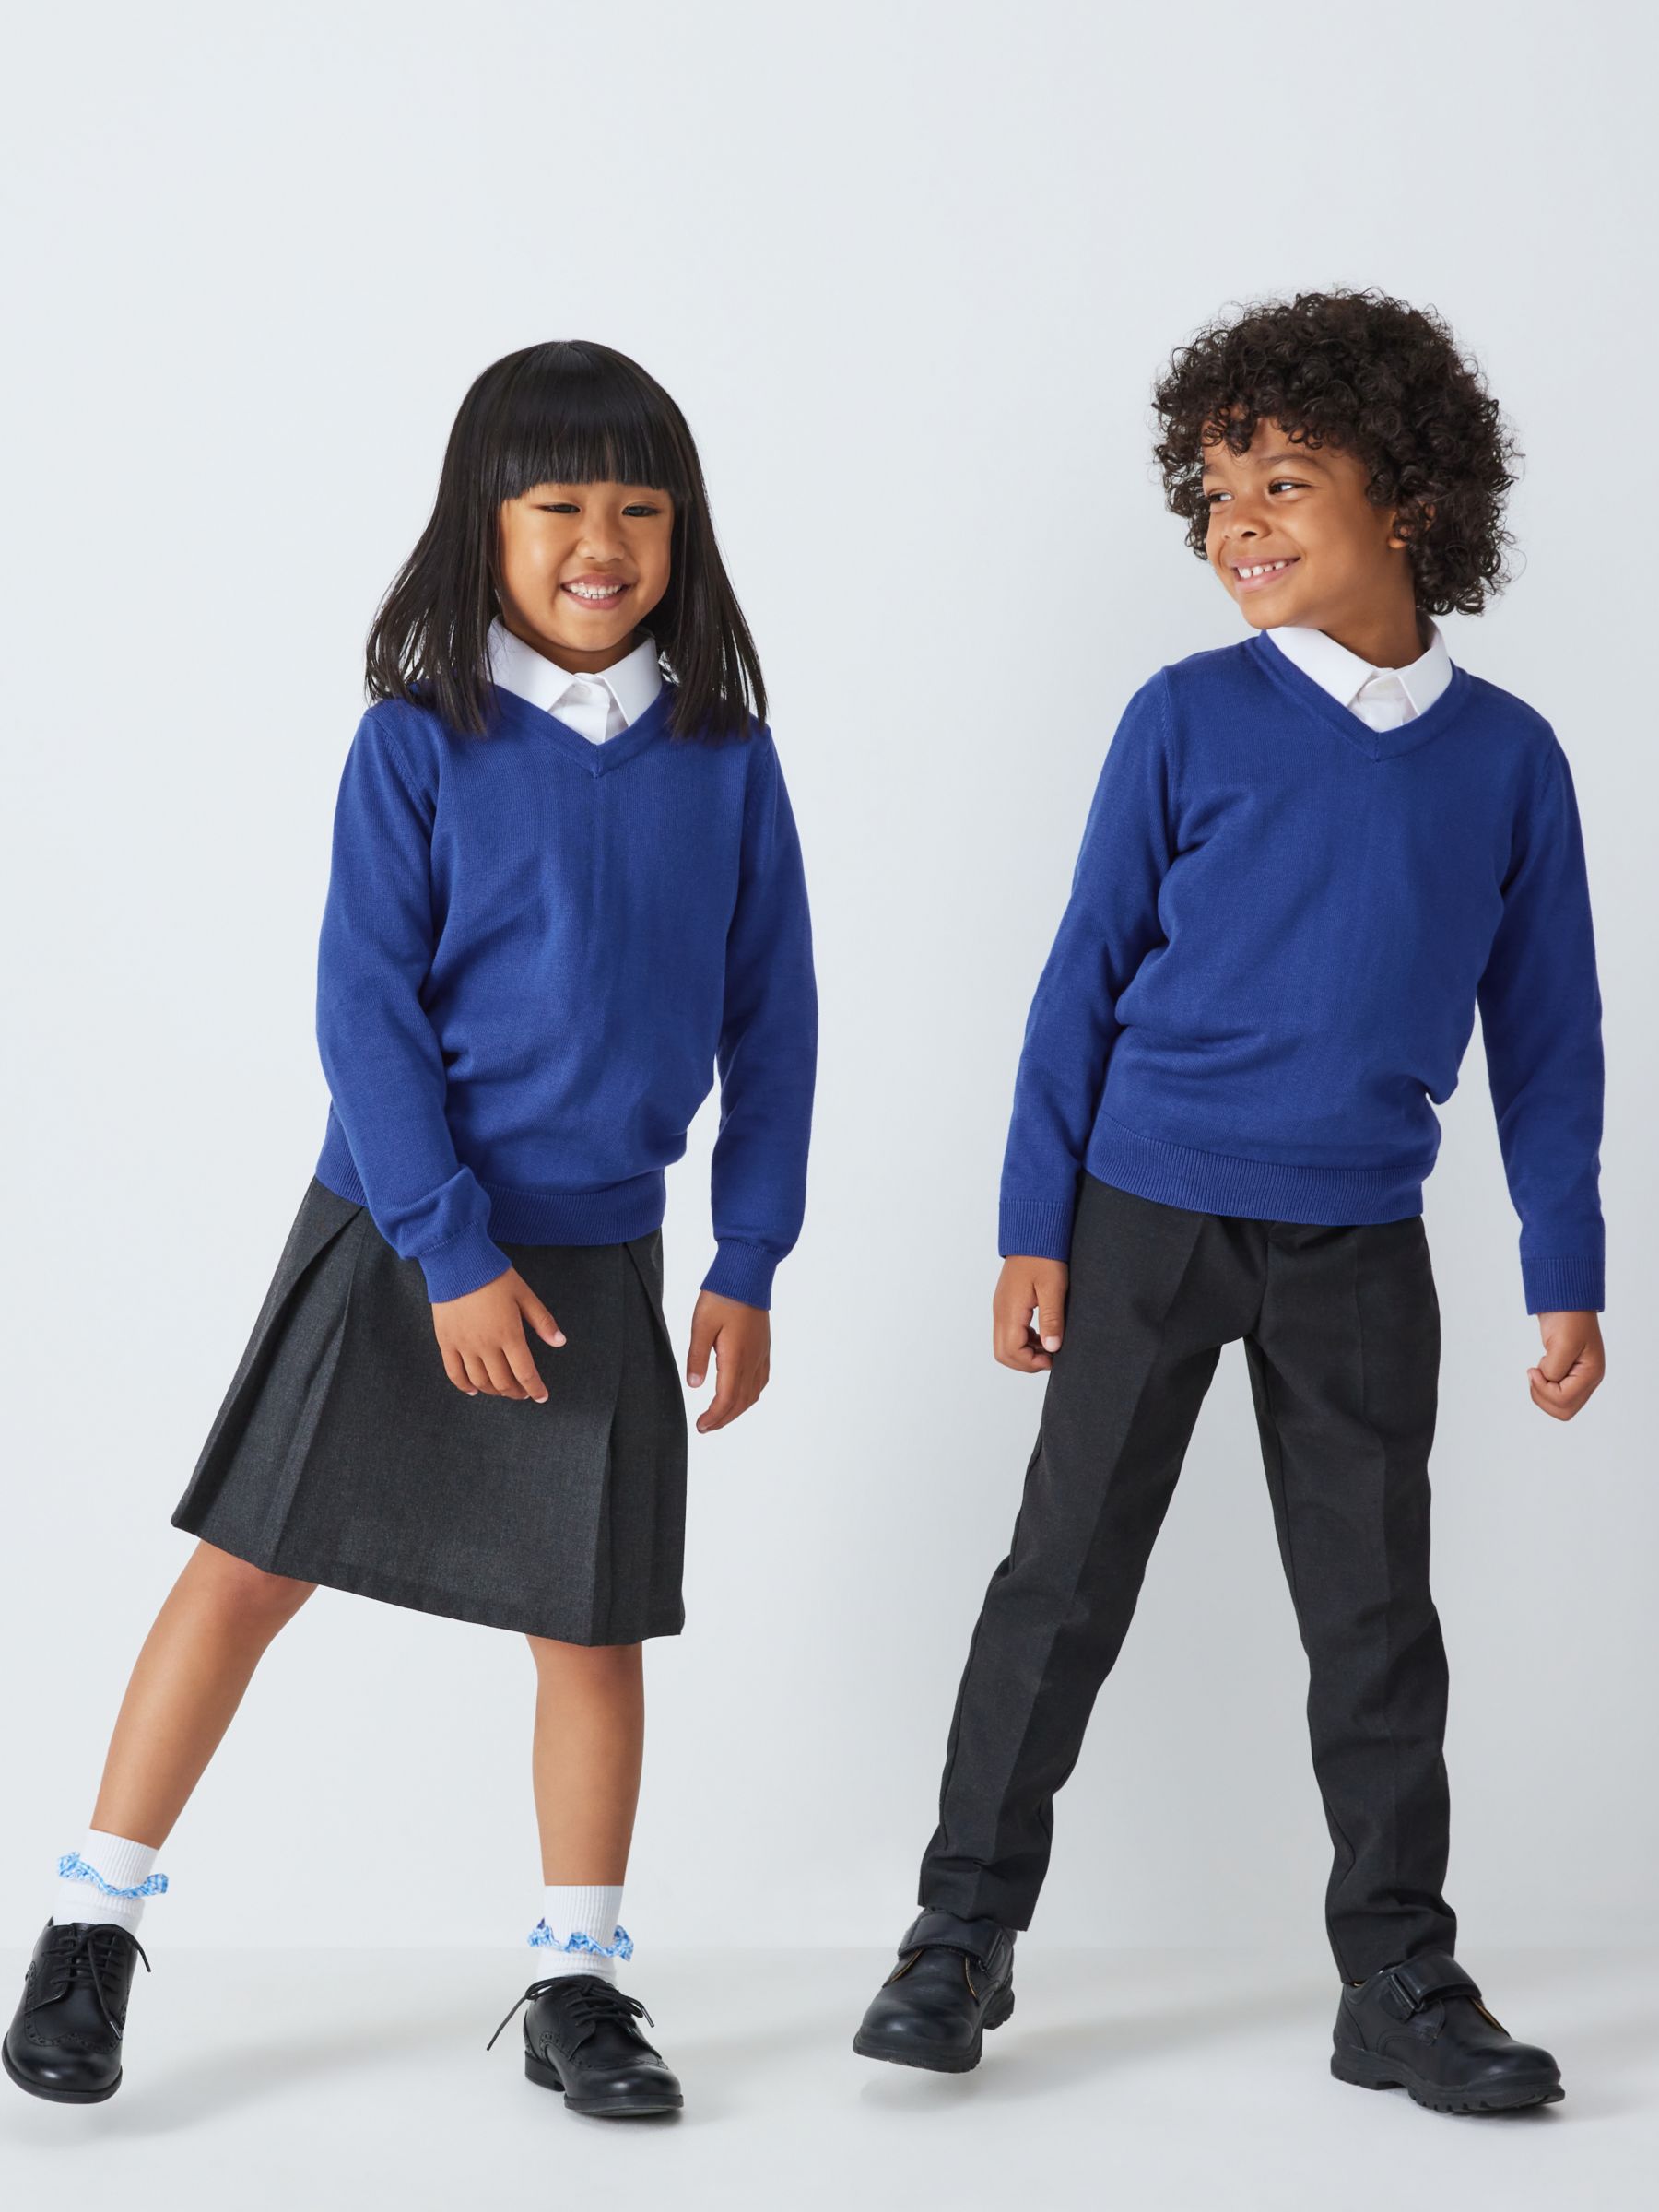 John Lewis ANYDAY Unisex Cotton School Jumper, Pack of 2, Blue Royal, 15-16 years